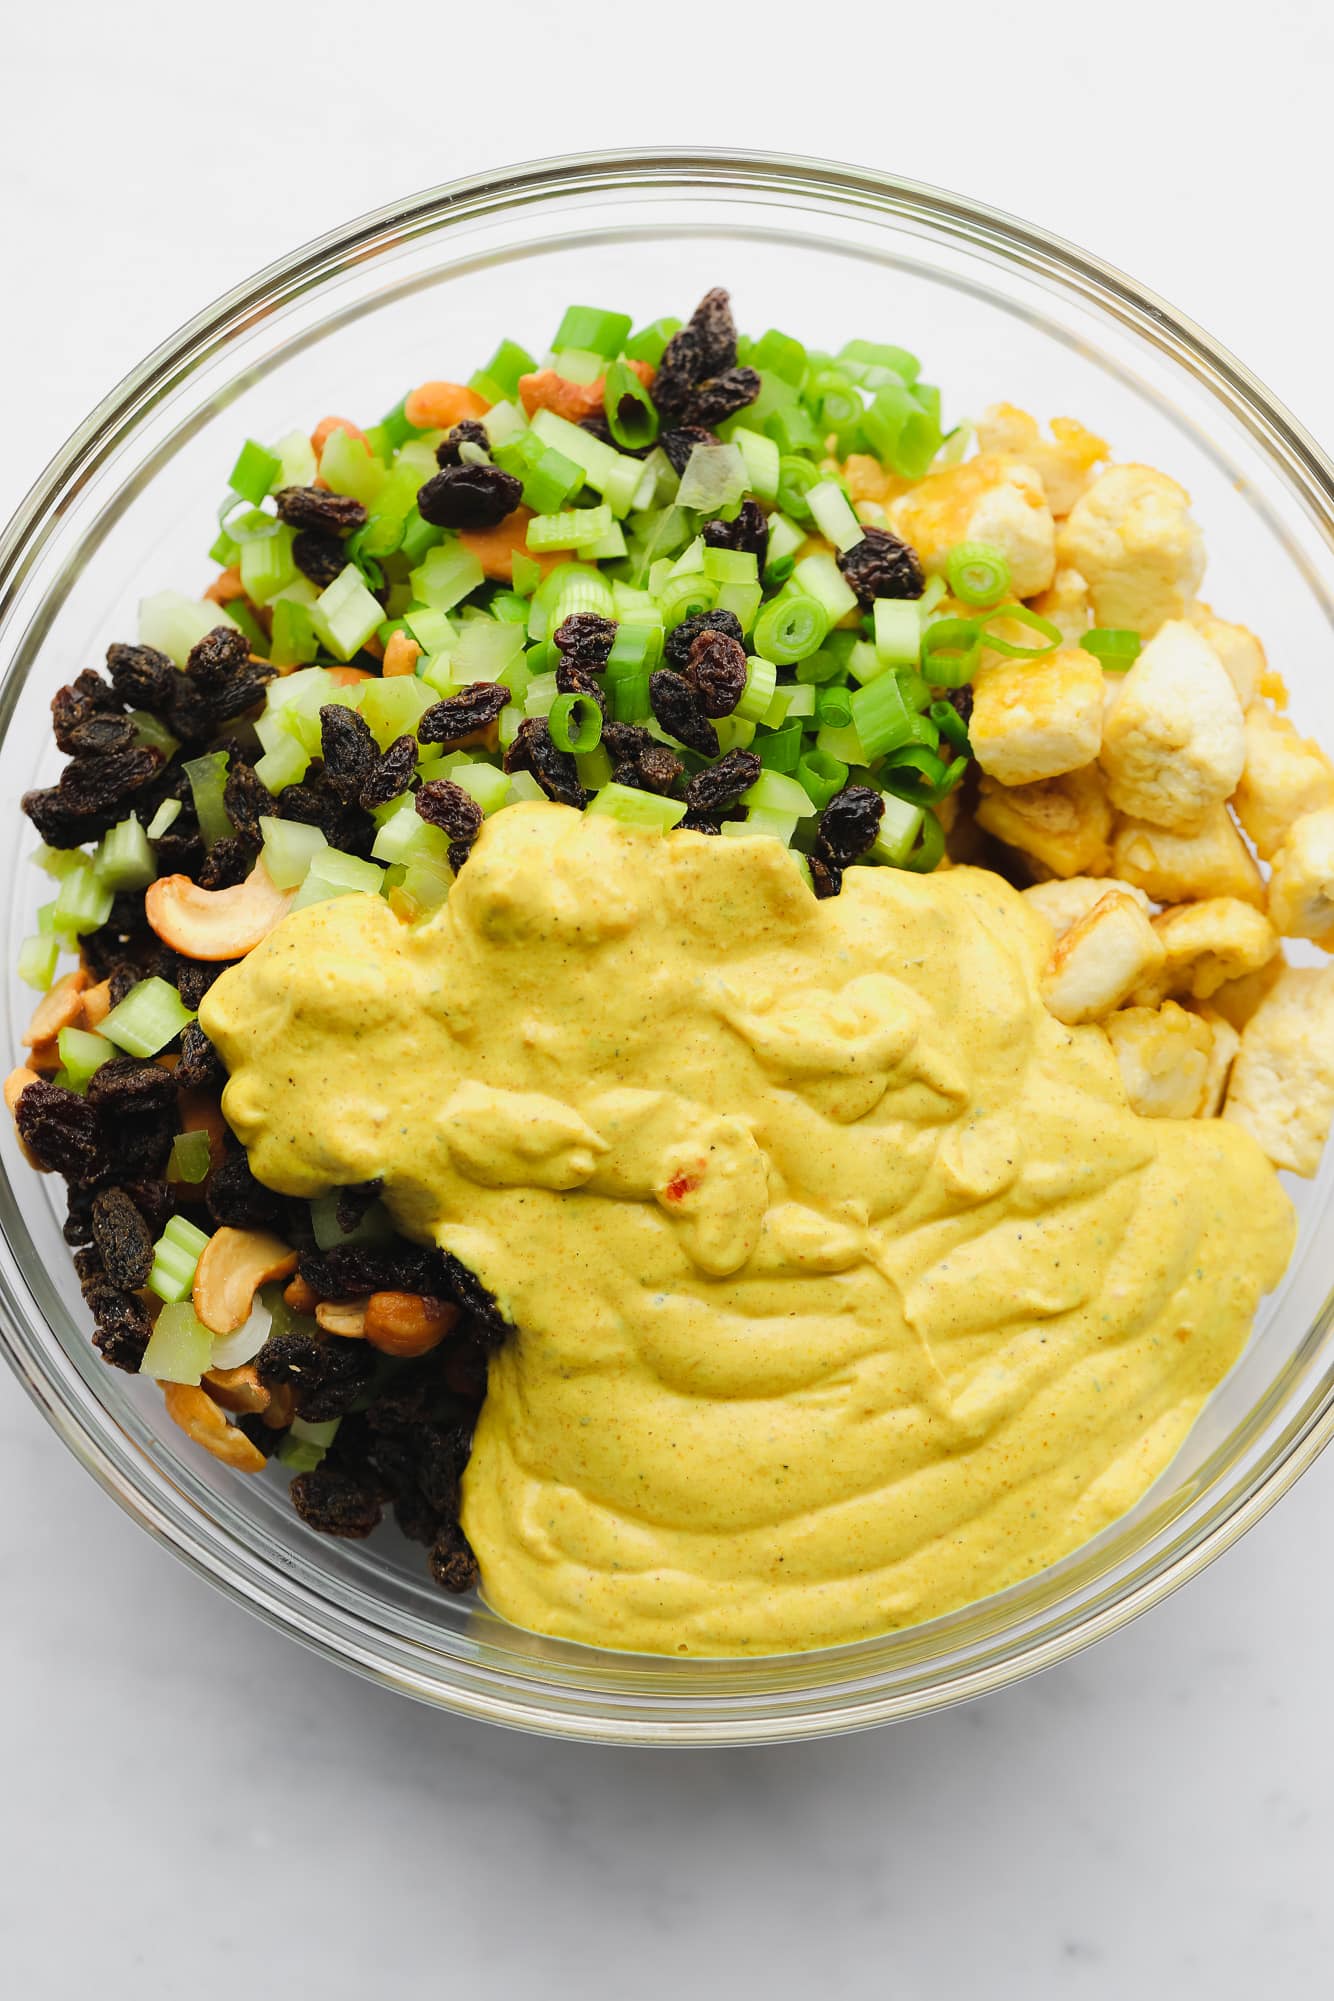 vegetables, baked tofu, and a creamy yellow sauce together in a large glass bowl.